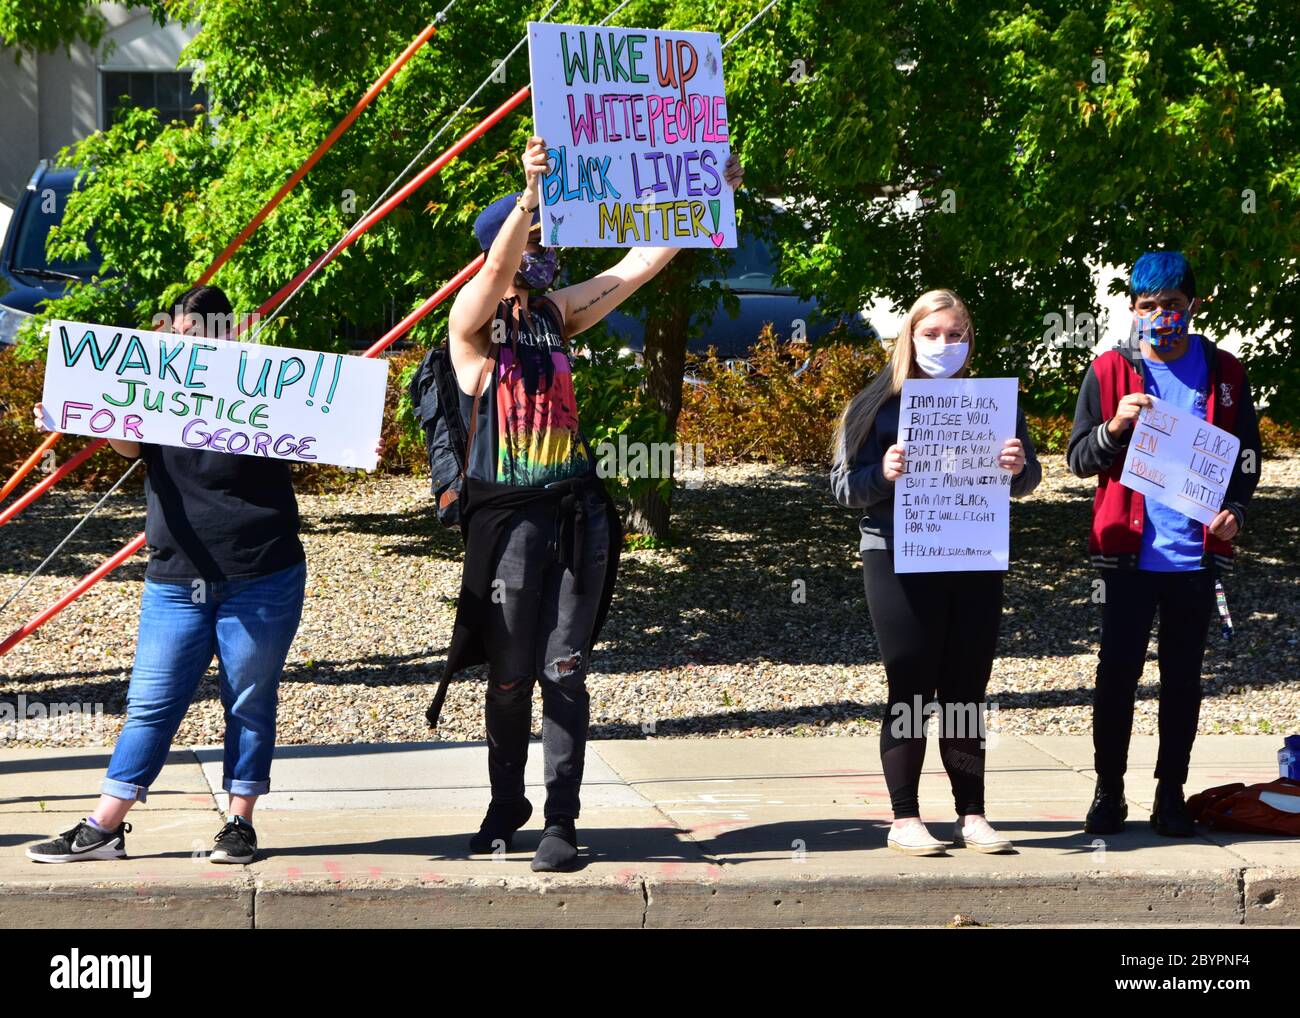 Bismarck, ND, USA. May 29, 2020  People with signs and banners march through streets in the city protesting the death of George Floyd. Stock Photo